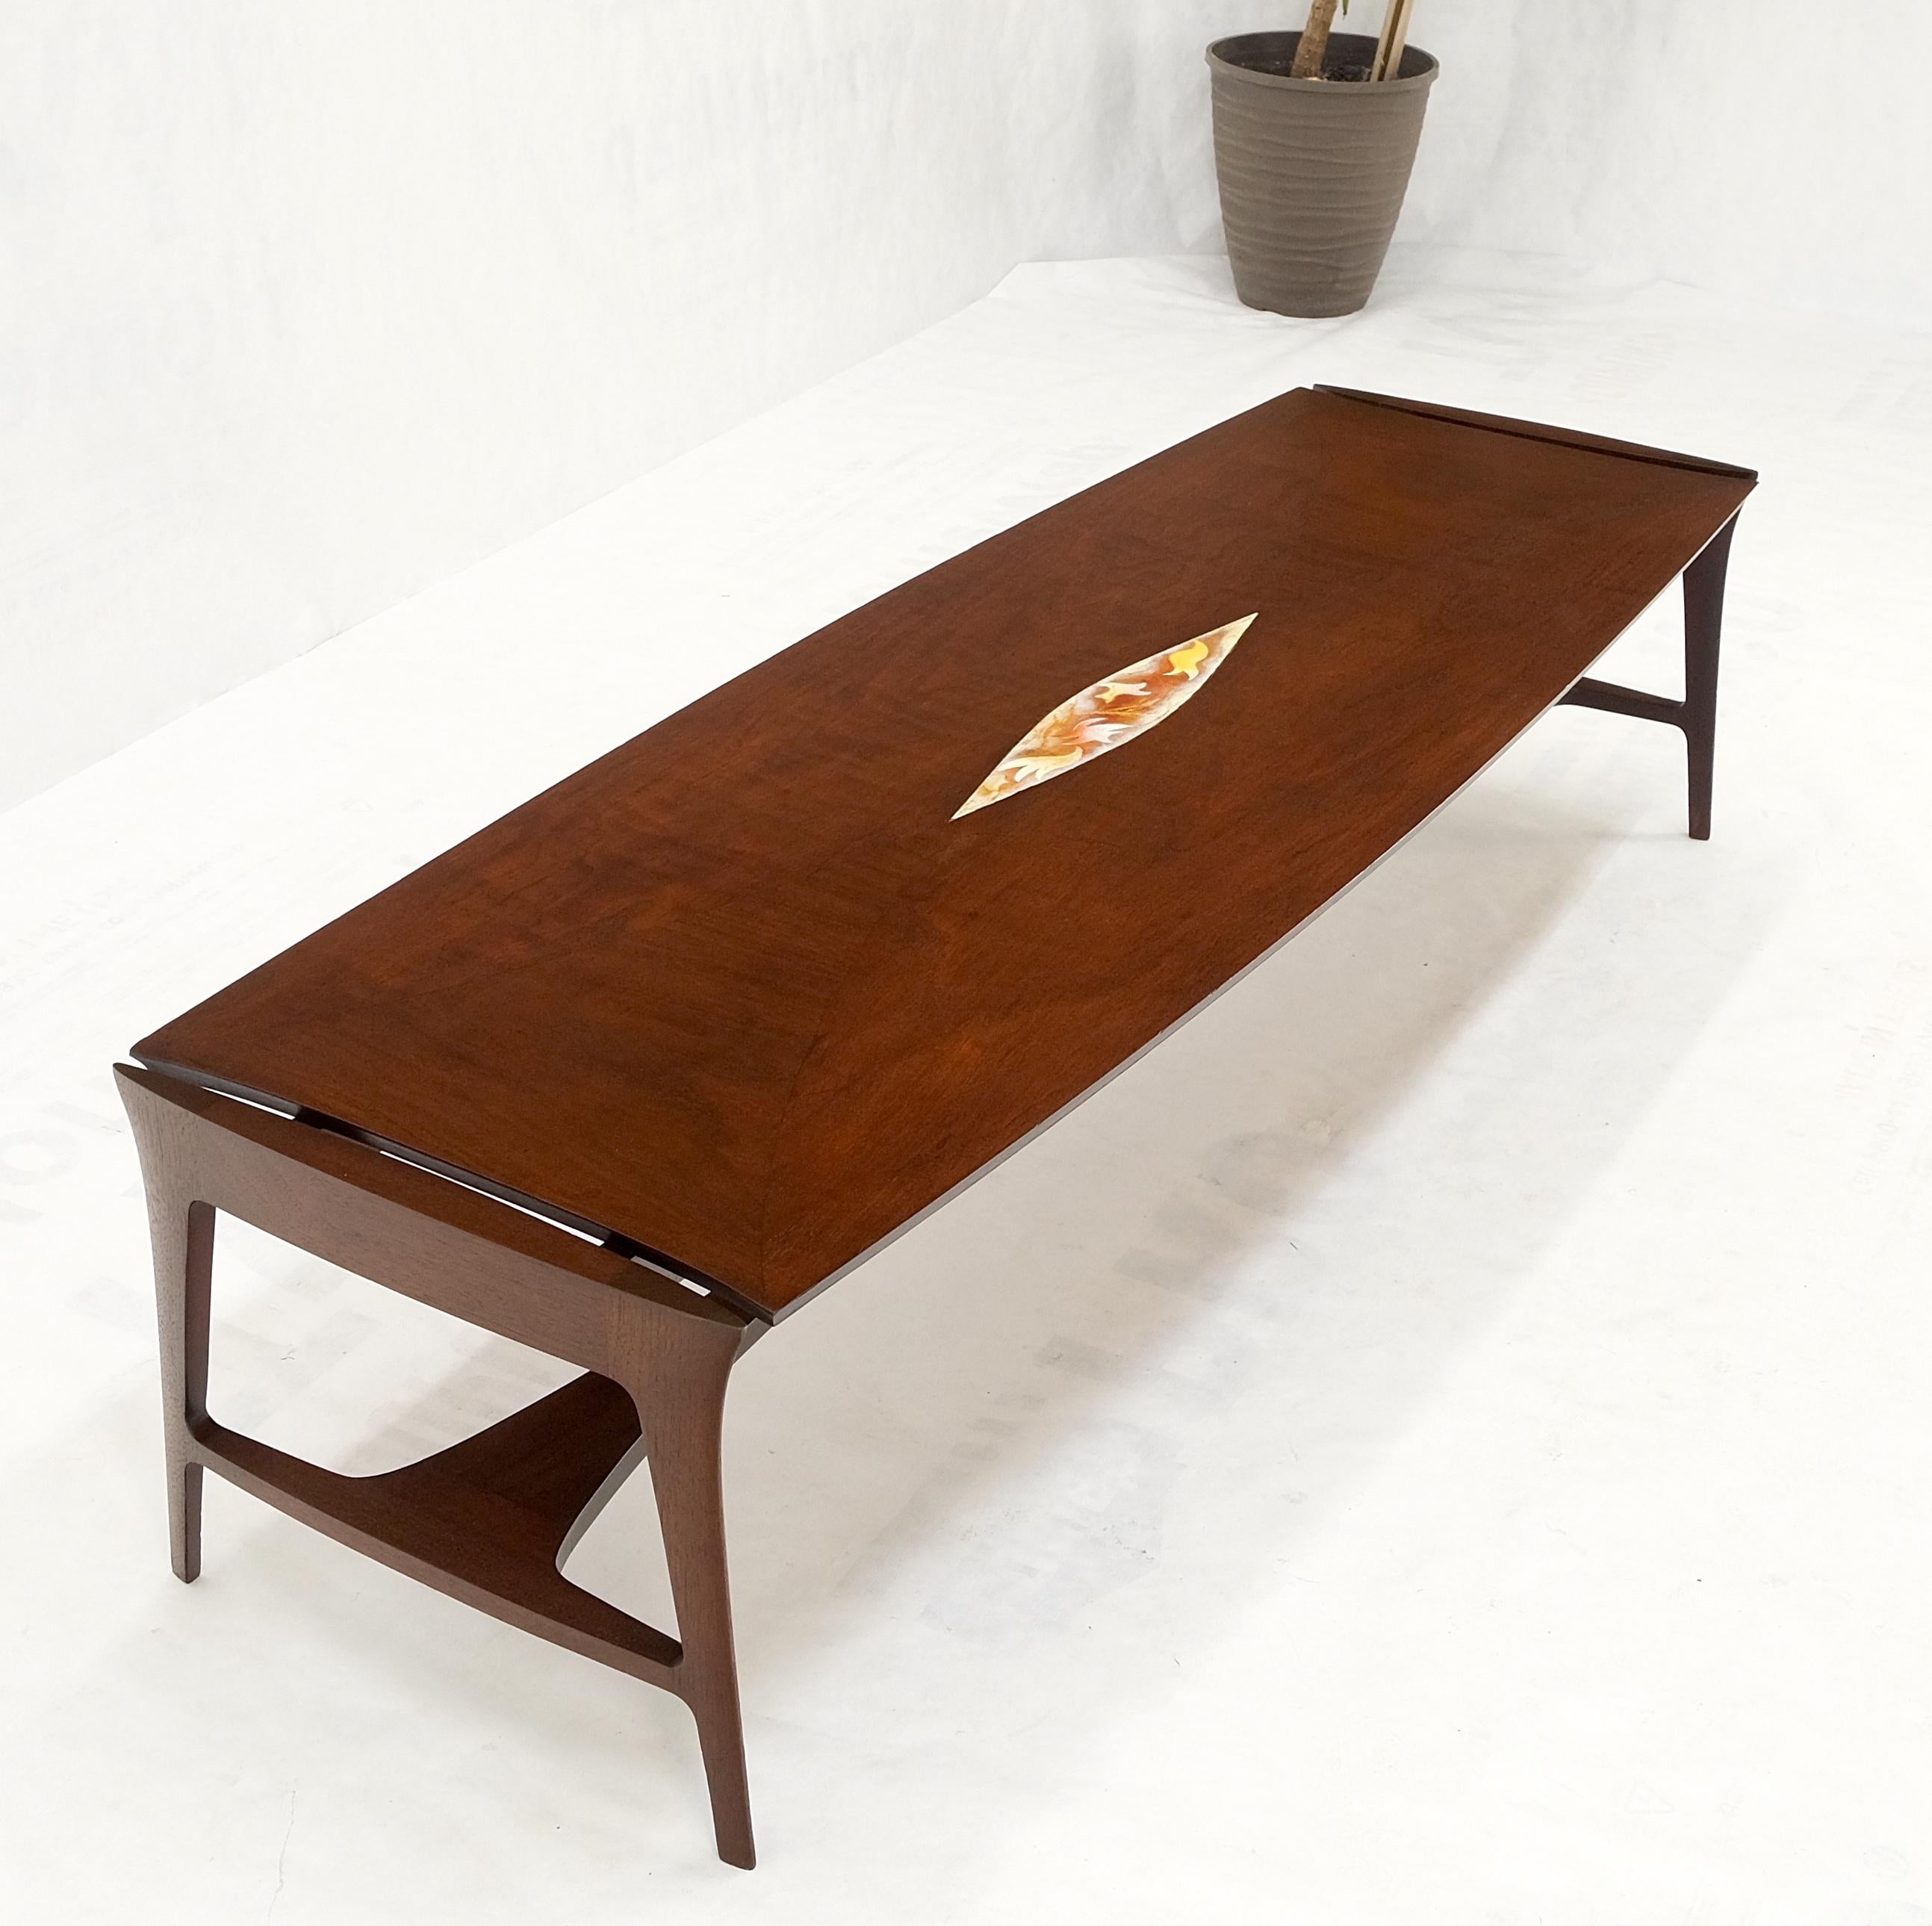 Oiled Walnut Tile Insert Floating Top Mid-Century Long Surfboard Coffee Table For Sale 6